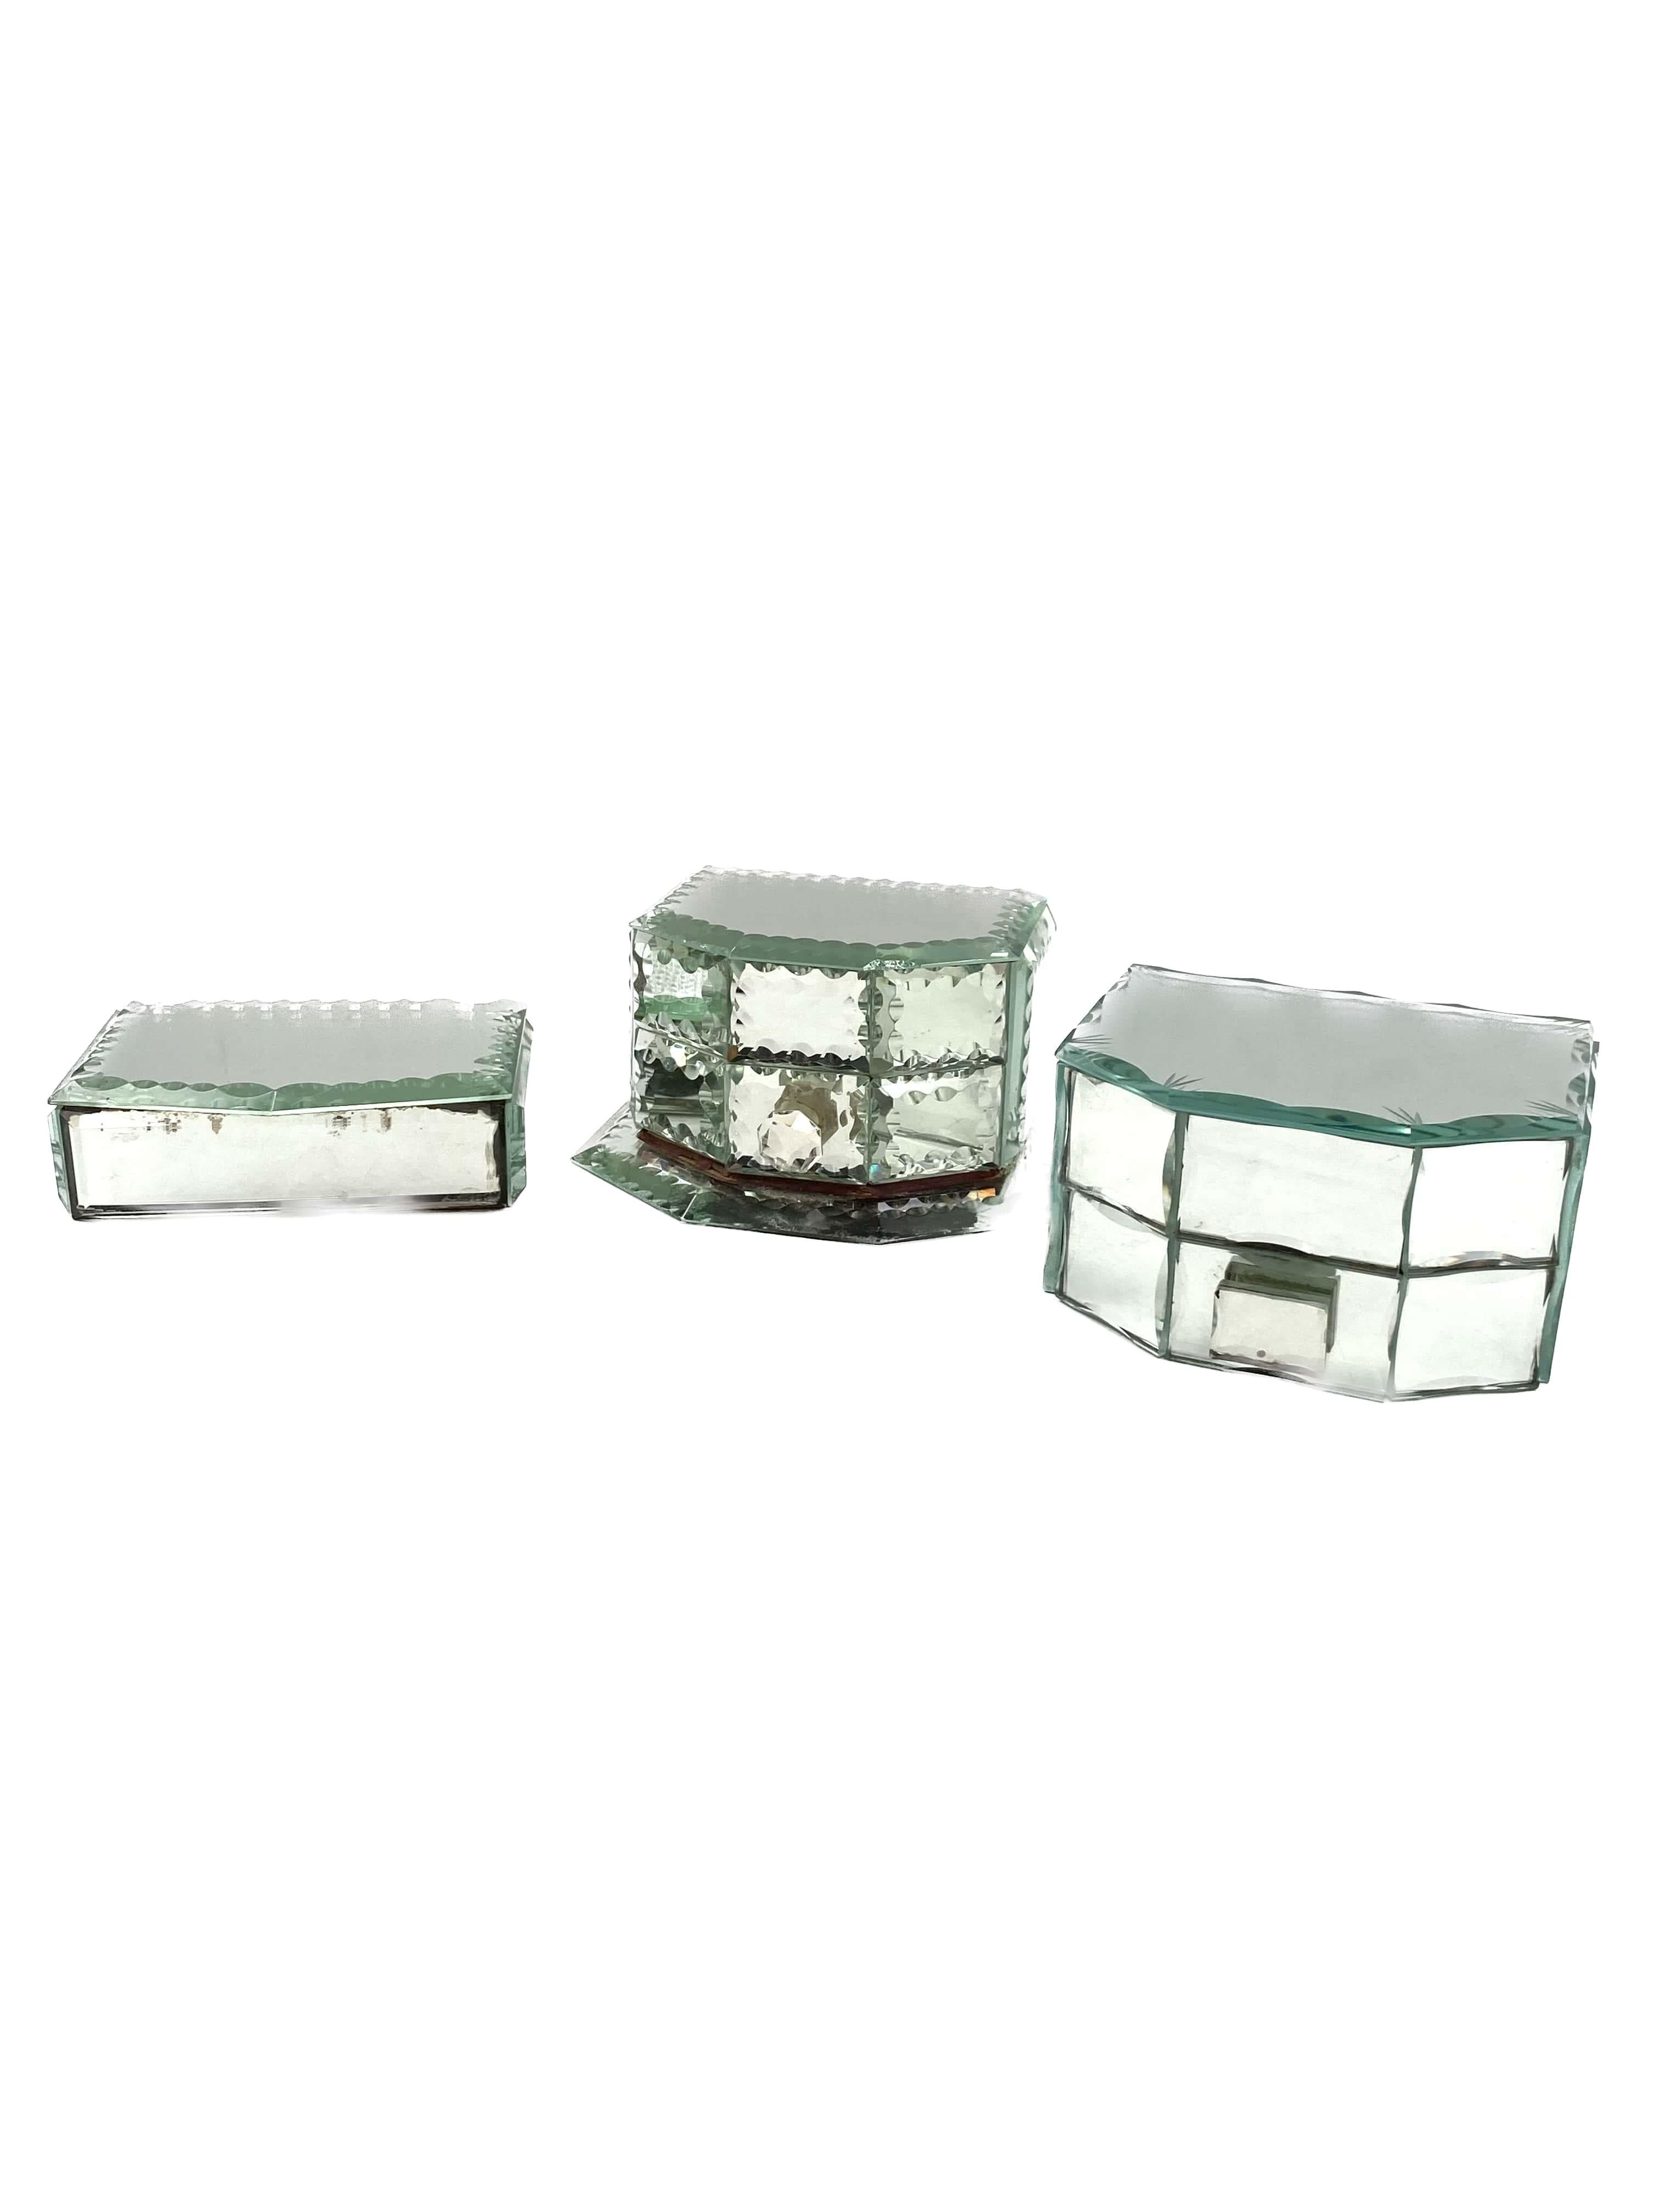 Art Deco Midcentury Set of 3 Mirrored Jewelry Boxes, France, 1940s For Sale